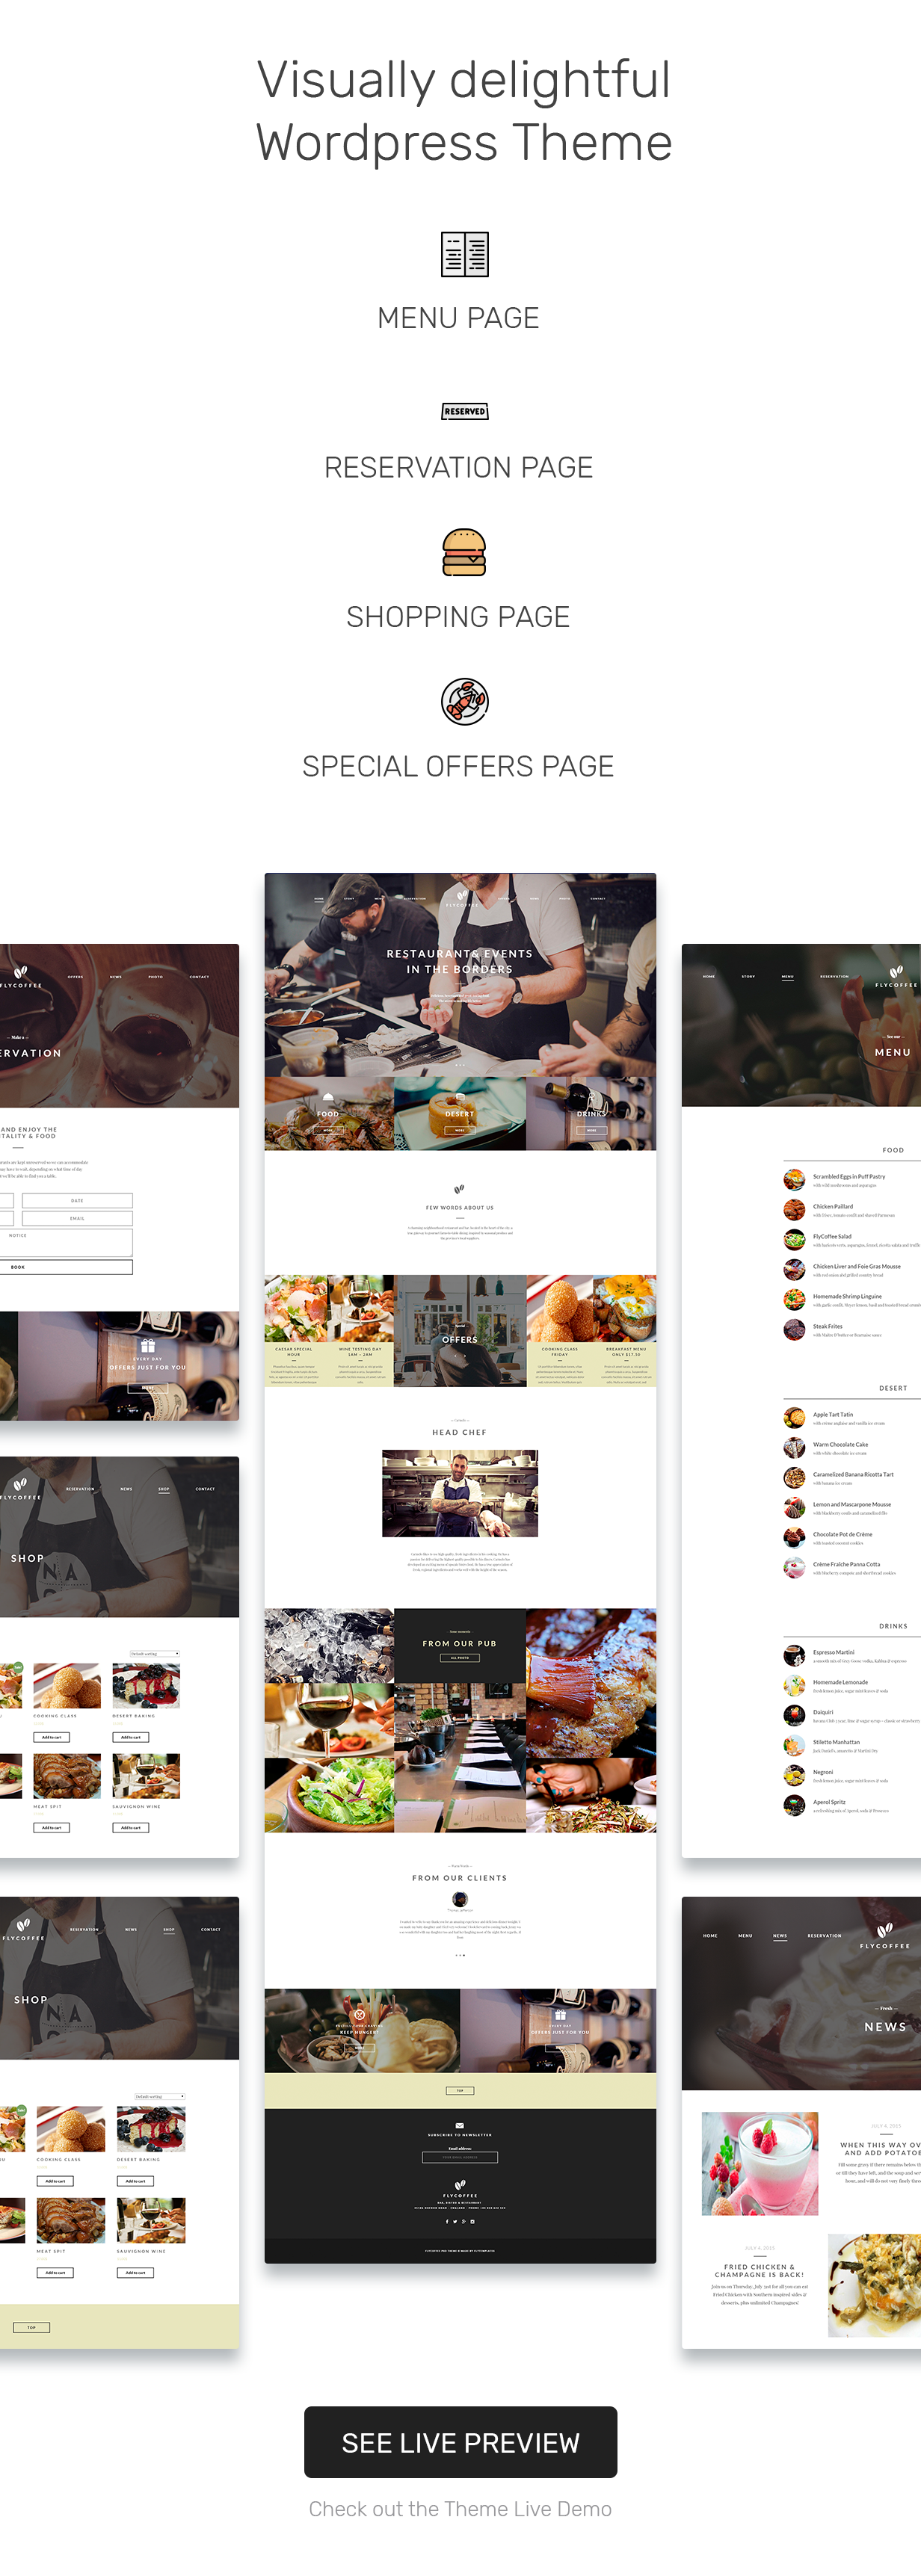 FlyCoffee Shop - Responsive Cafe and Restaurant WordPress Theme - 2